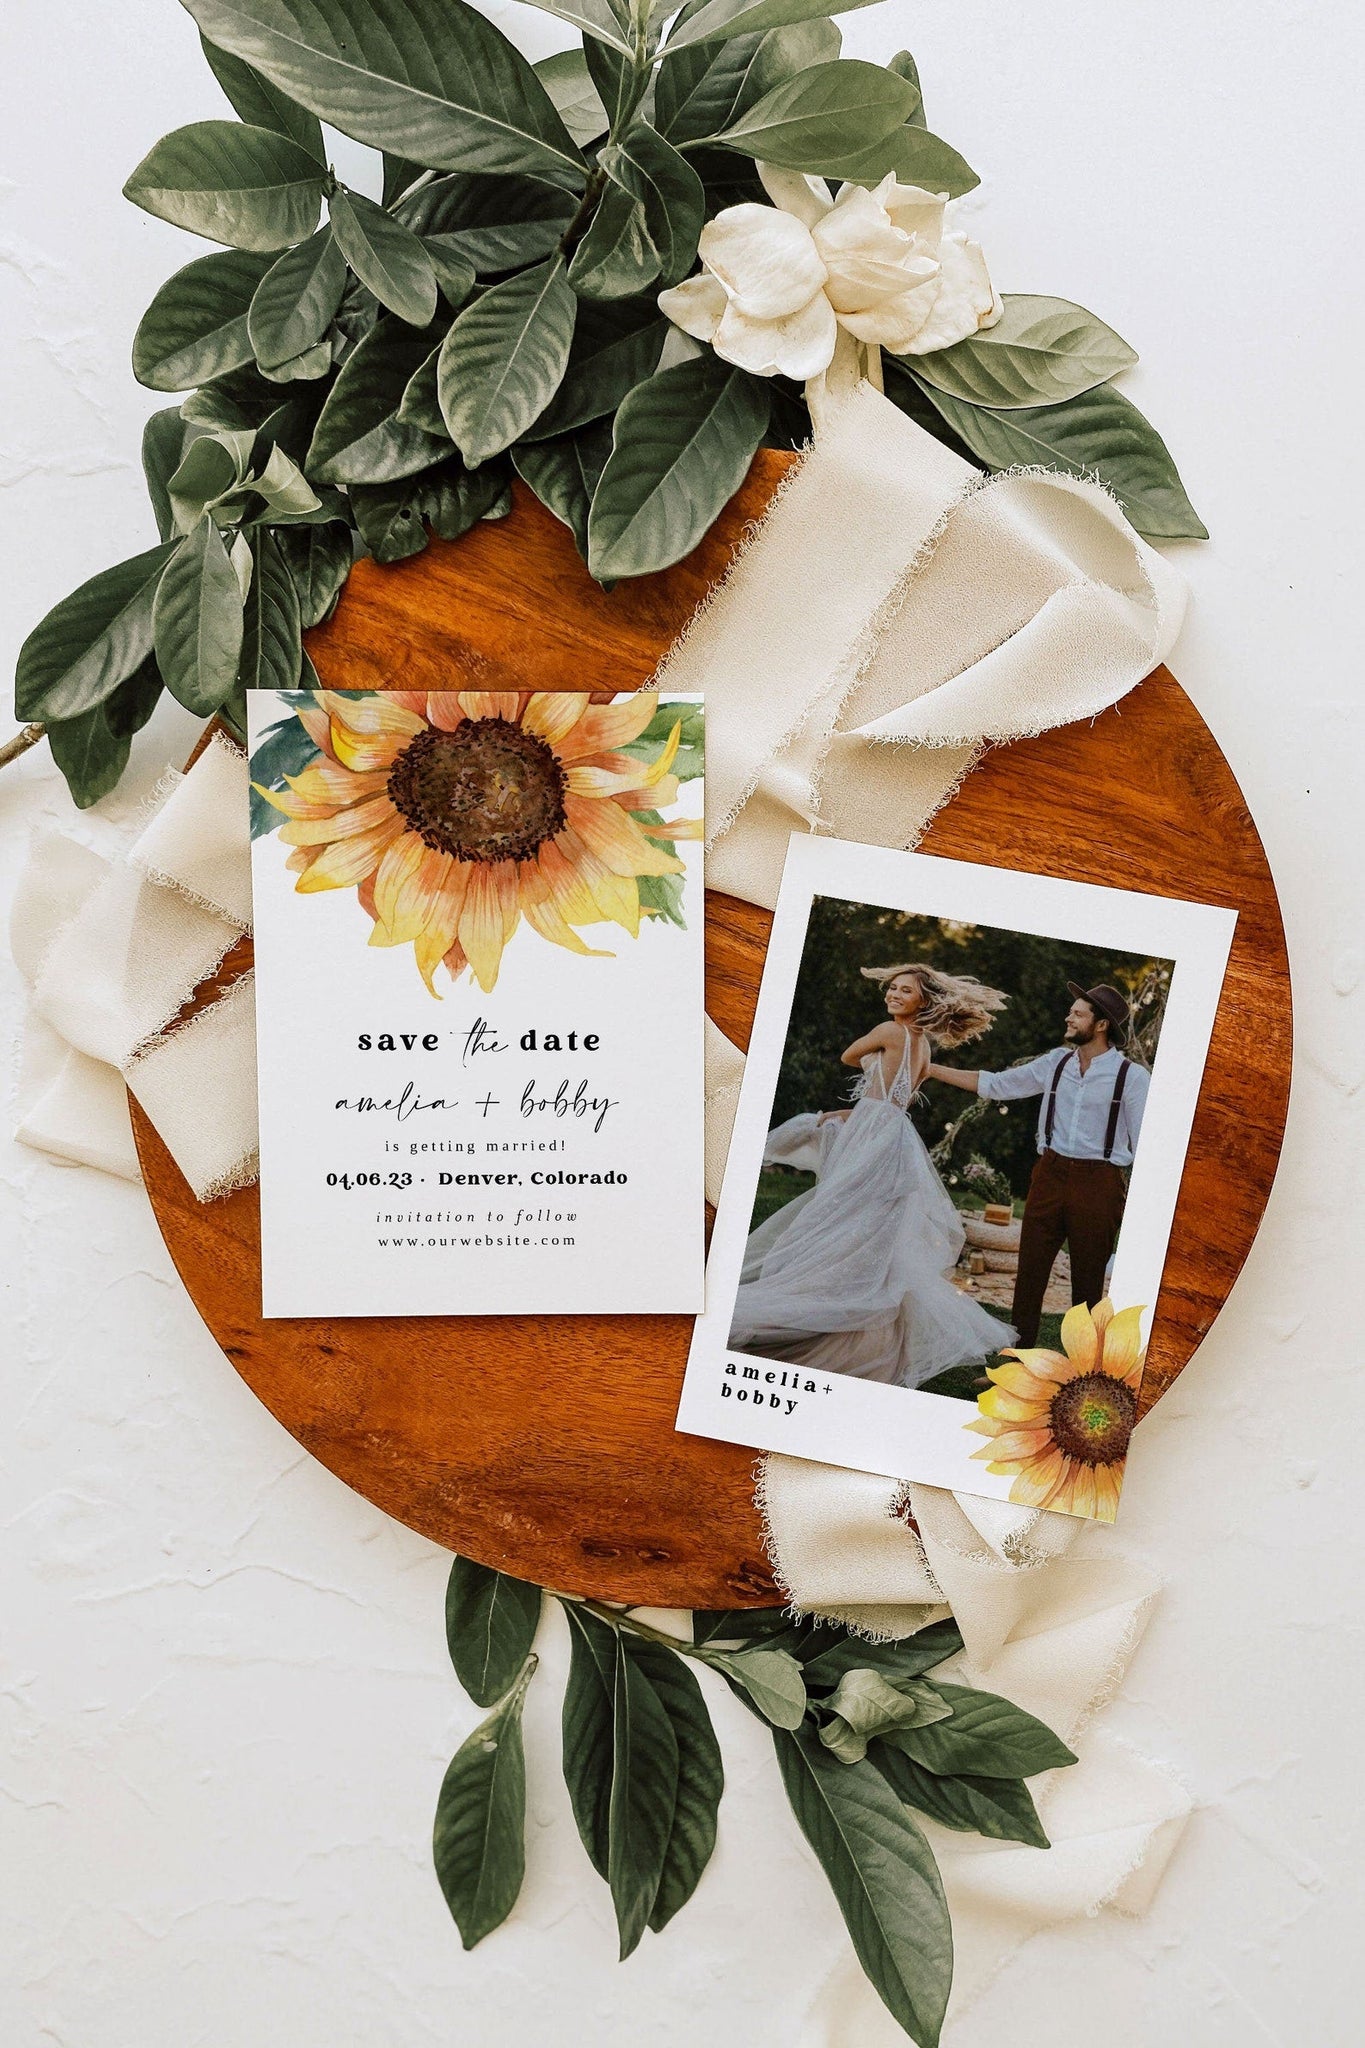 Fall Save the Date Template Download, Sunflower Save the Date Template, Modern Save the Date Card Template, Autumn Save the Date